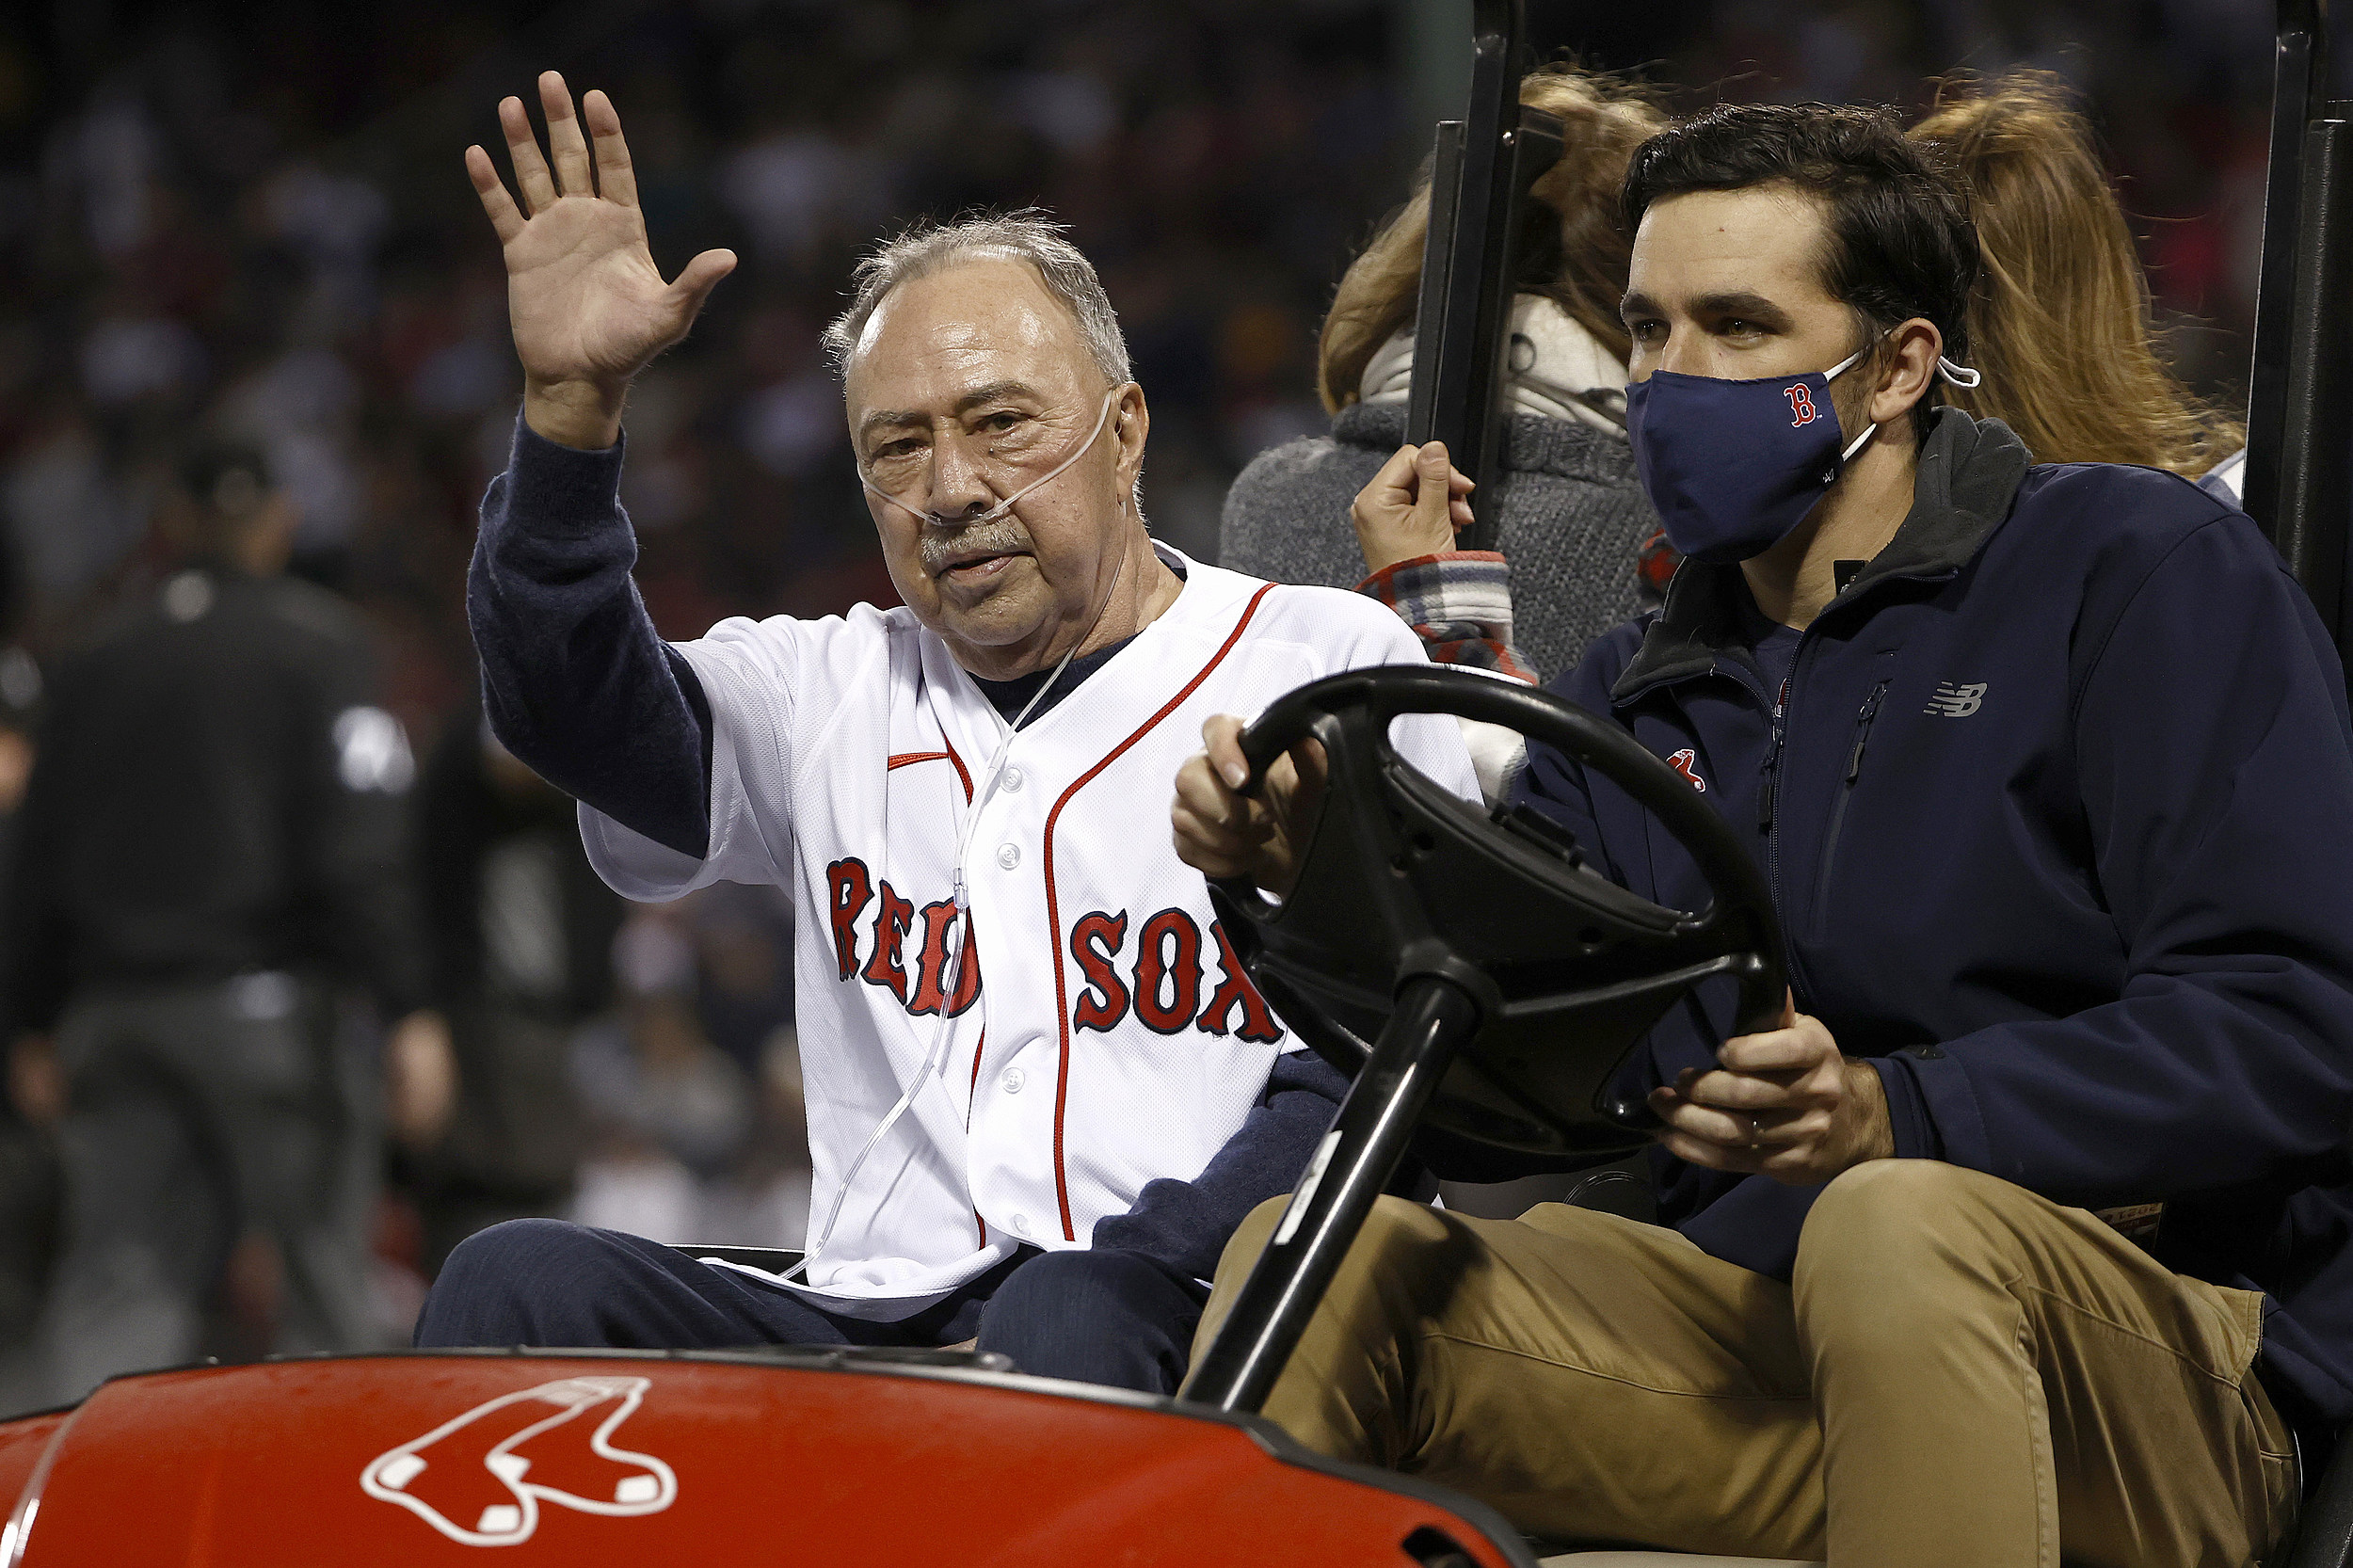 draaipunt Decoratie Concentratie Family of Jerry Remy Invites Public to Attend Waltham Wake